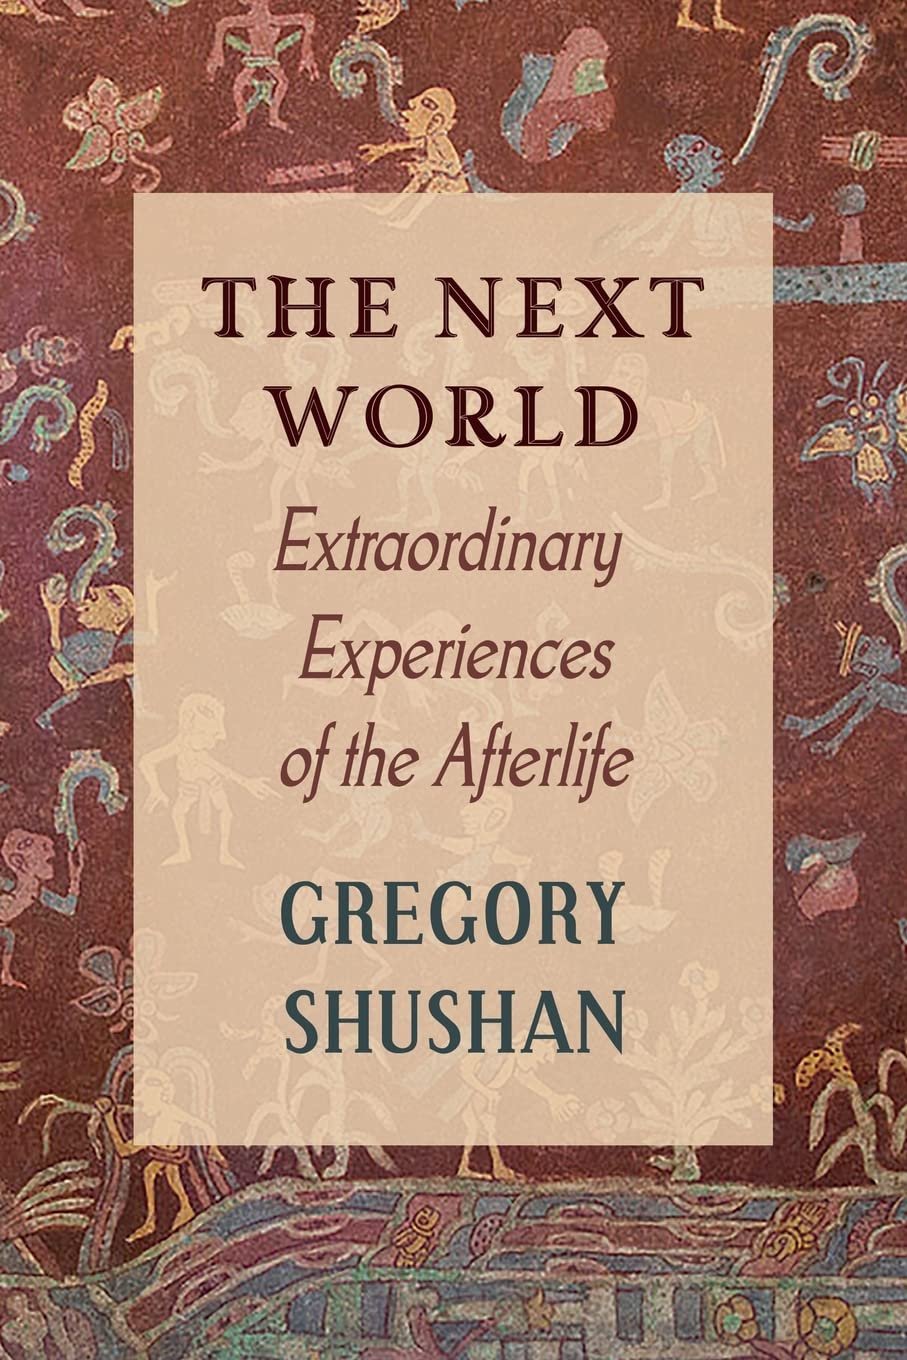 The Next World: Extraordinary Experiences of the Afterlife by Gregory Shushan